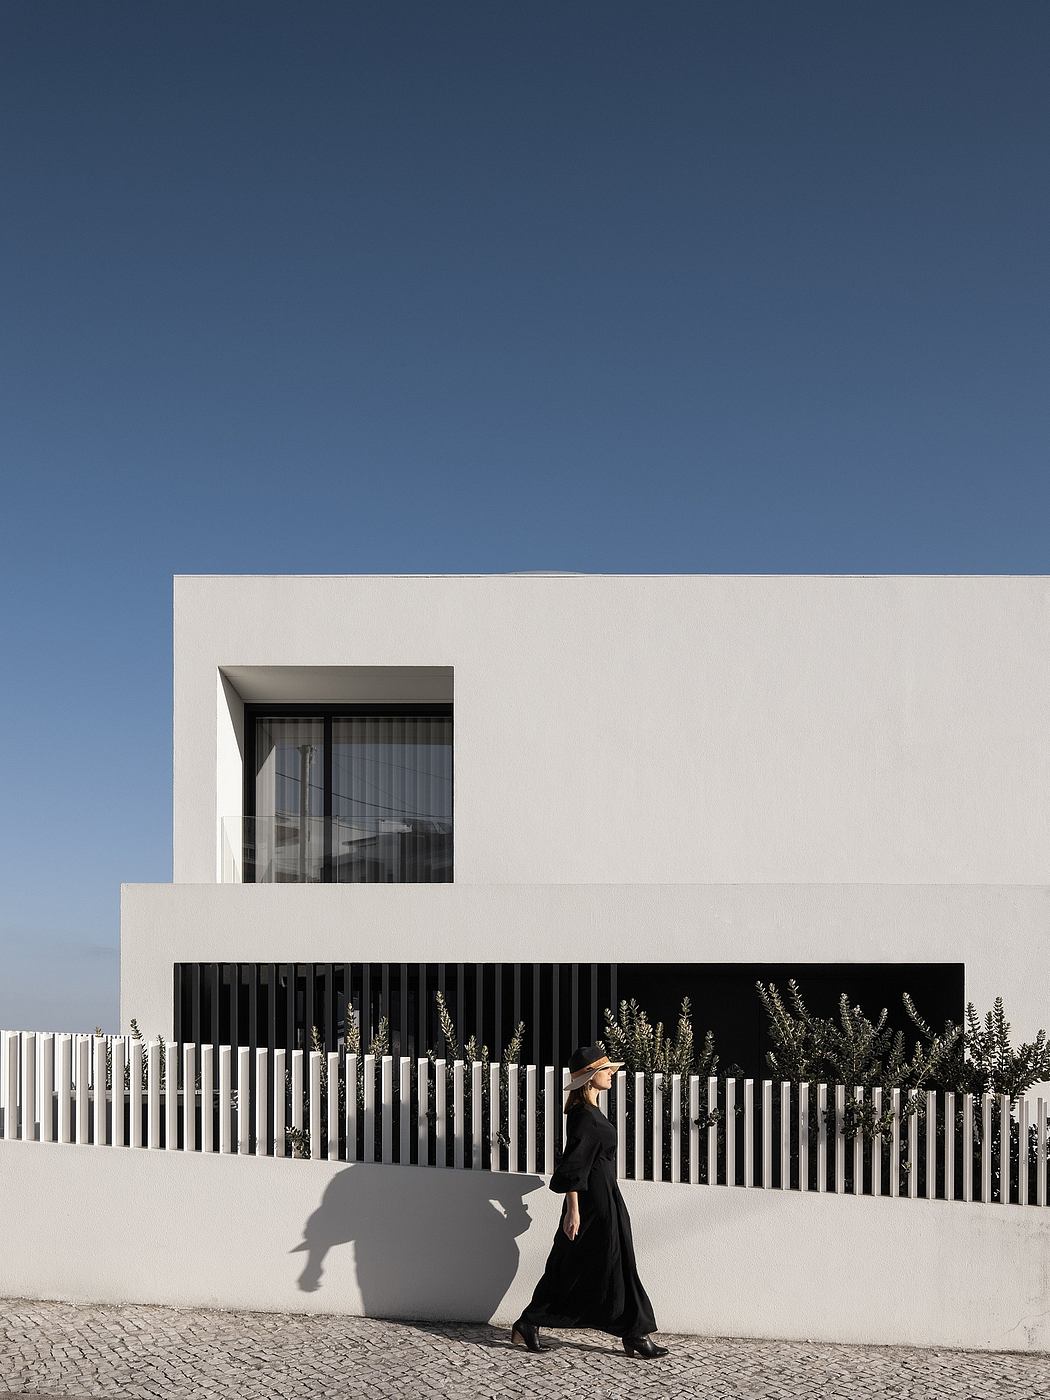 Modern minimalist building exterior with contrasting black and white elements, creating an intriguing visual composition.